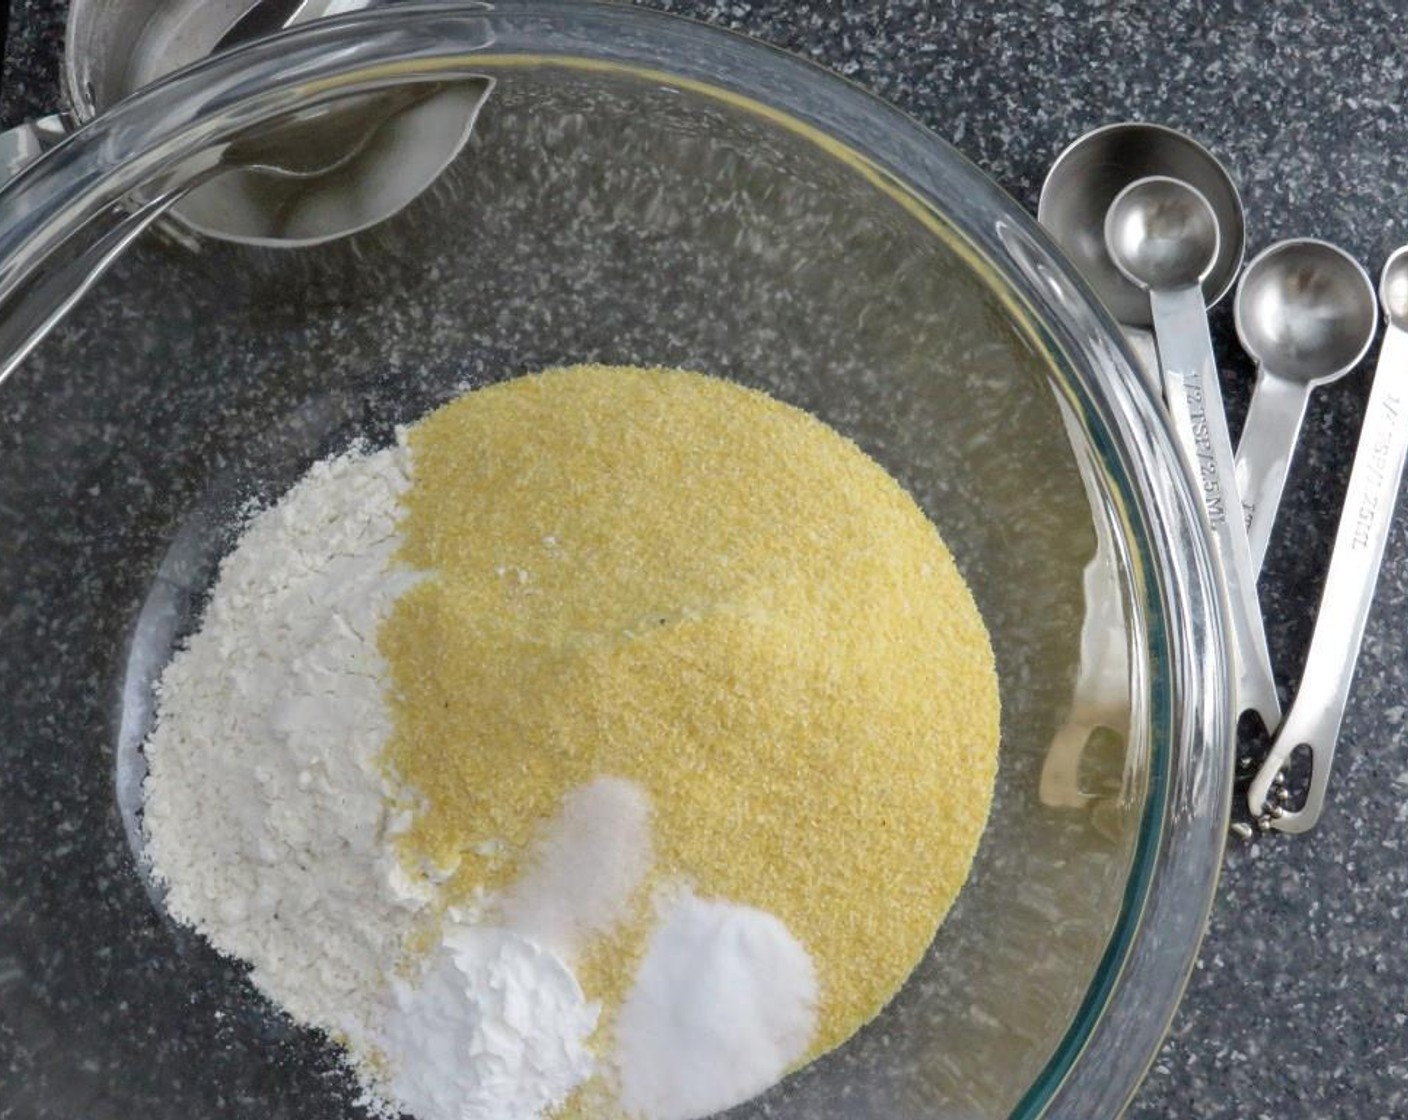 step 2 In a large bowl combine All-Purpose Flour (1 cup), Cornmeal (1 cup), Baking Powder (1/2 Tbsp), Baking Soda (1/2 tsp) and Salt (1/4 tsp).